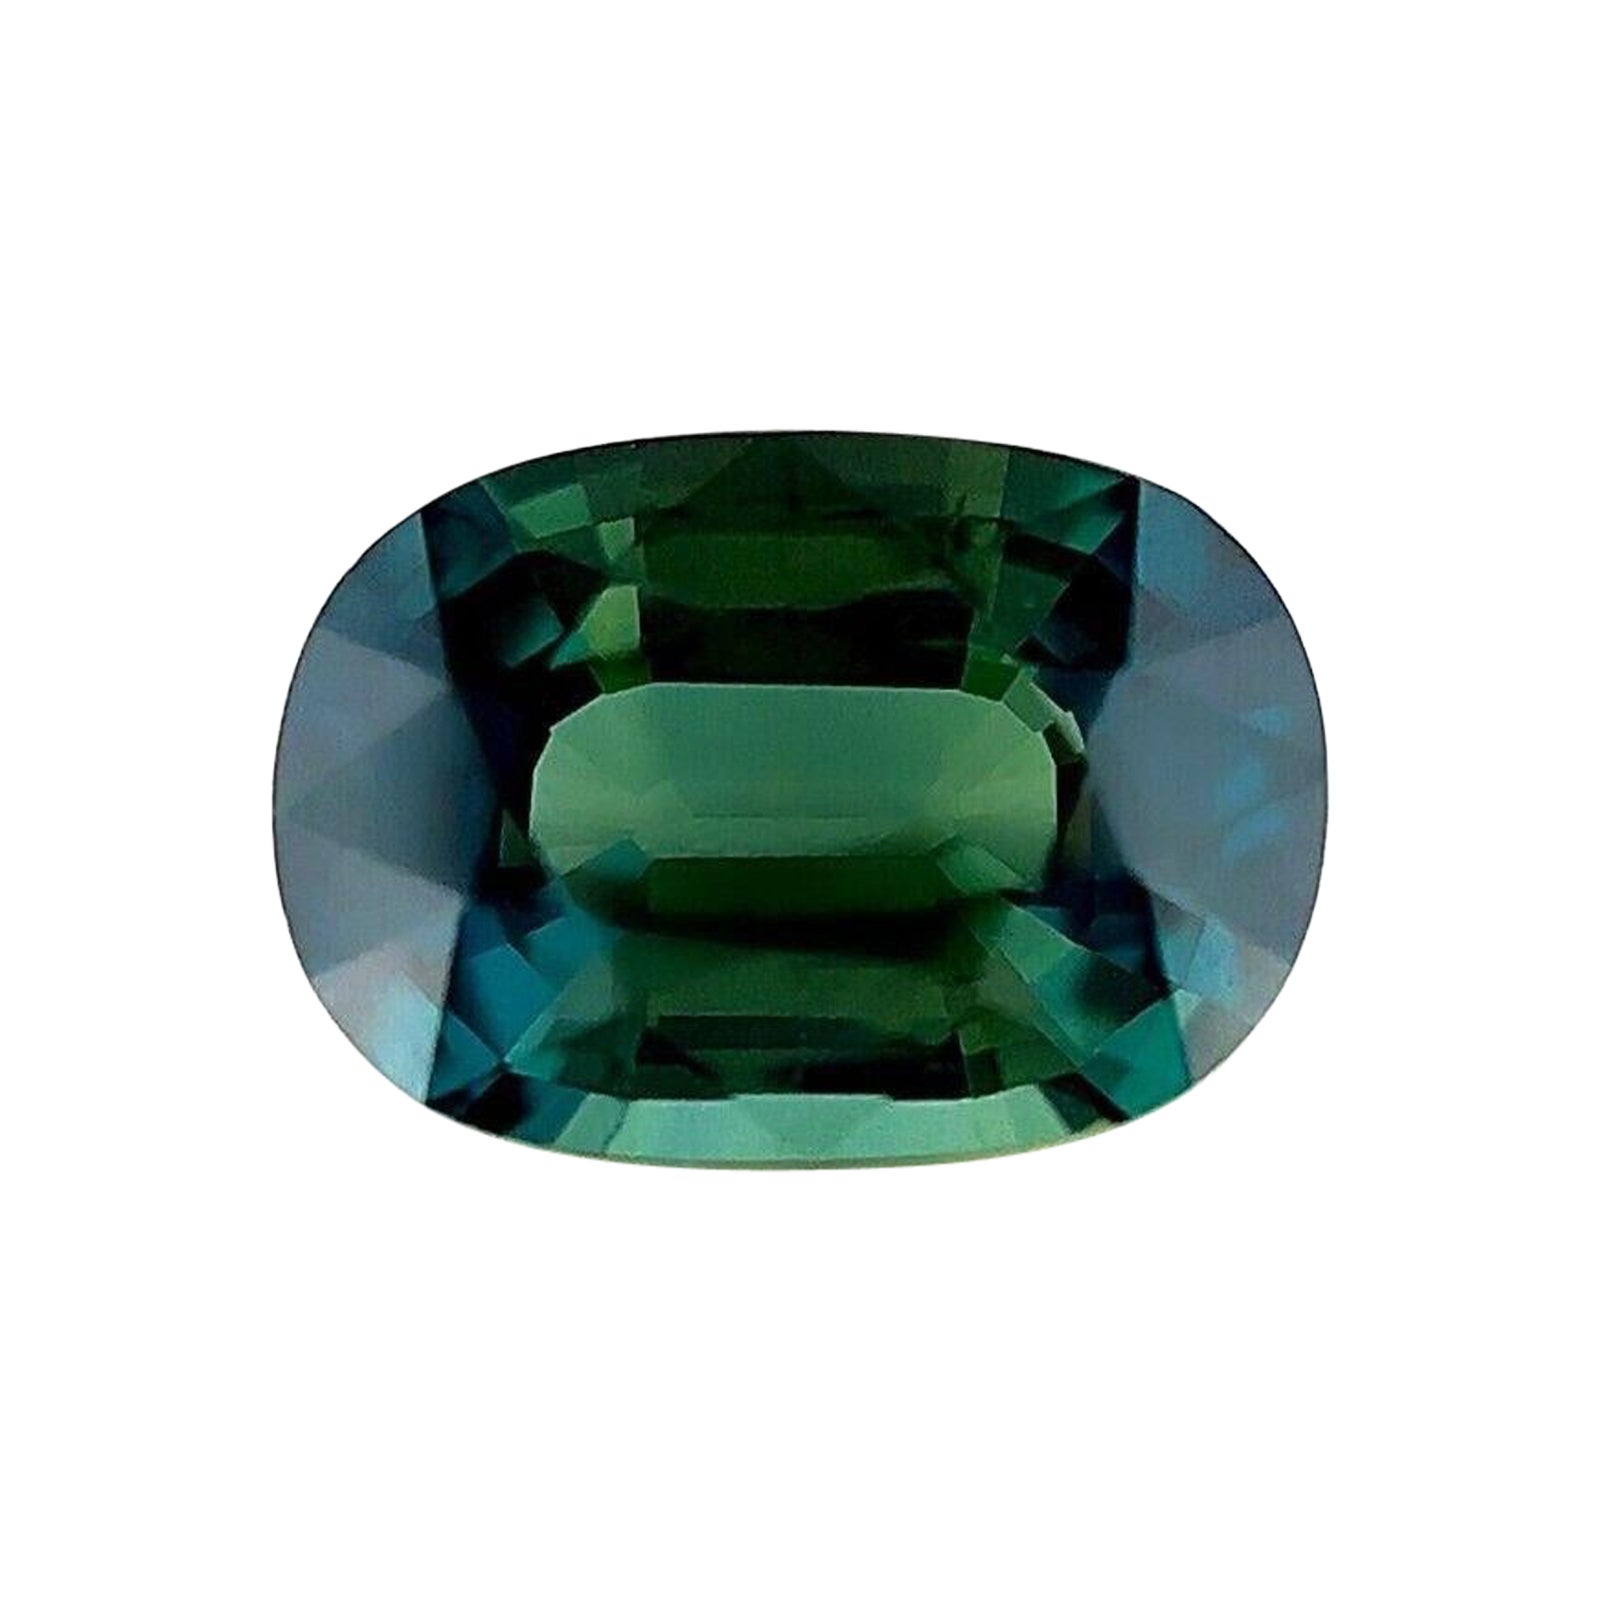 Rare 1.33Ct GIA Certified Green Blue Sapphire Untreated Cushion Cut 7.7x5.5mm For Sale